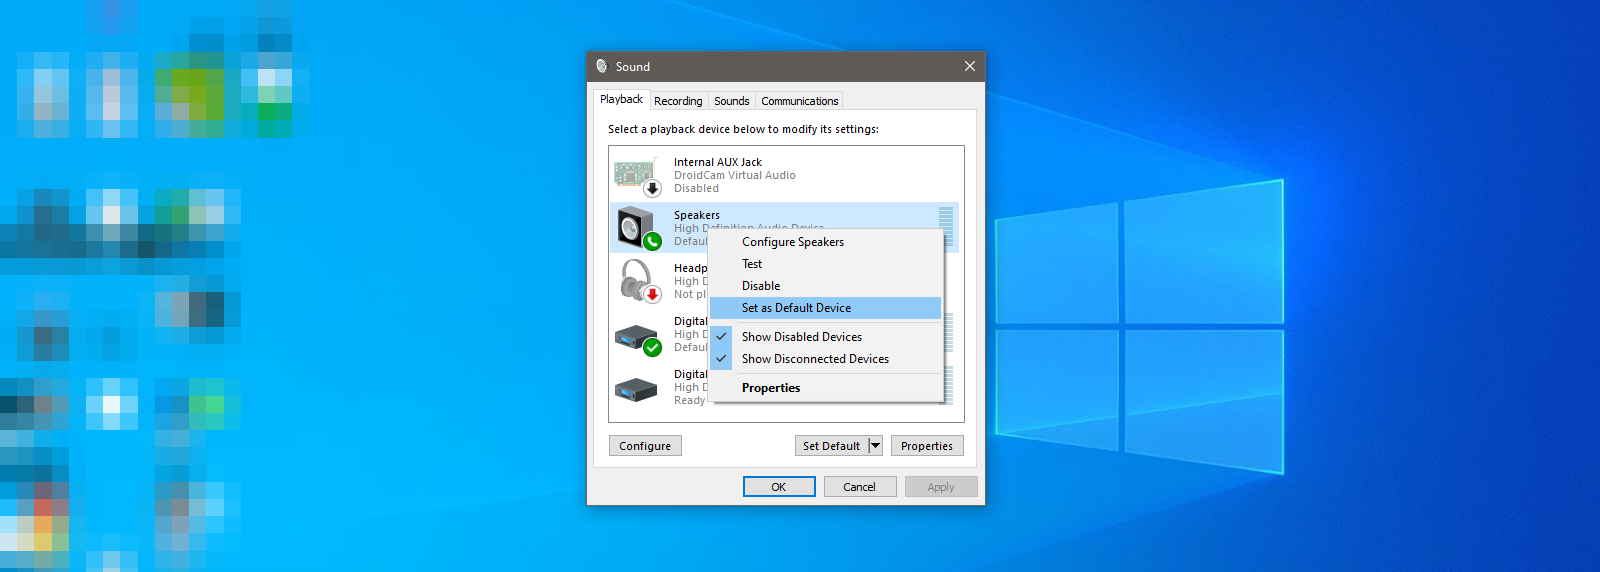 Setting Old Audio Device as Default in Windows 10